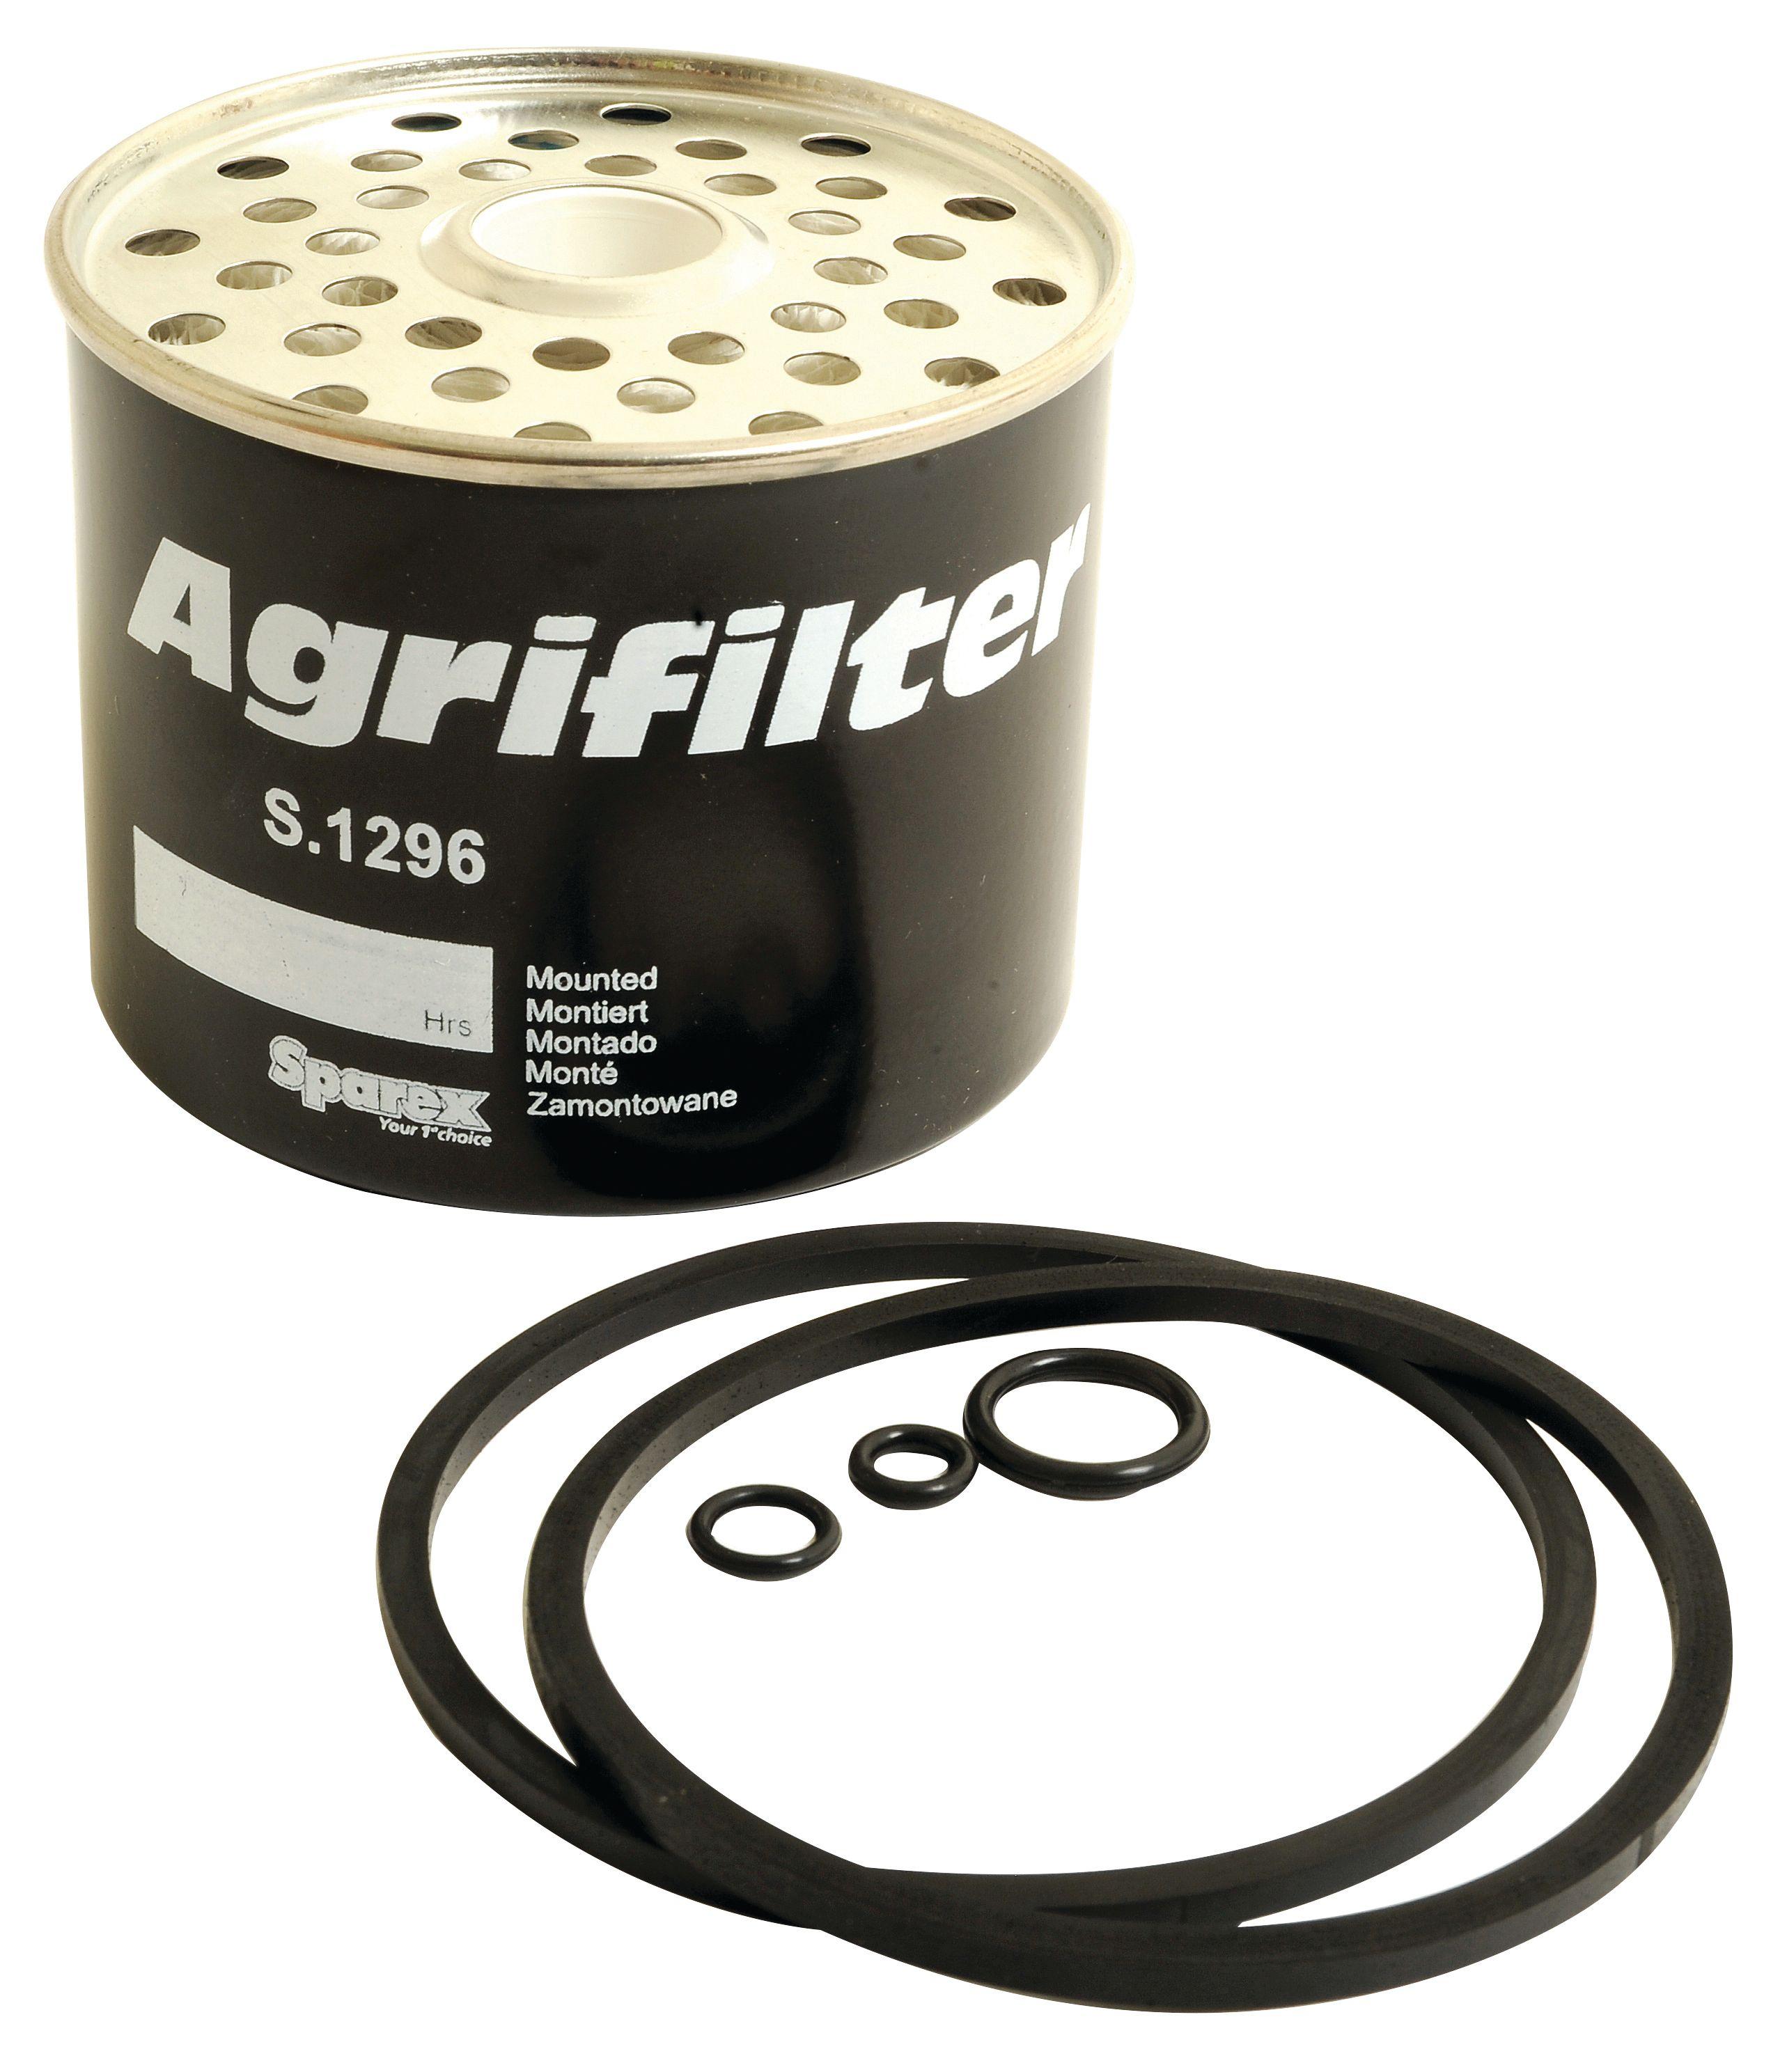 LONG TRACTOR FUEL FILTER 1296